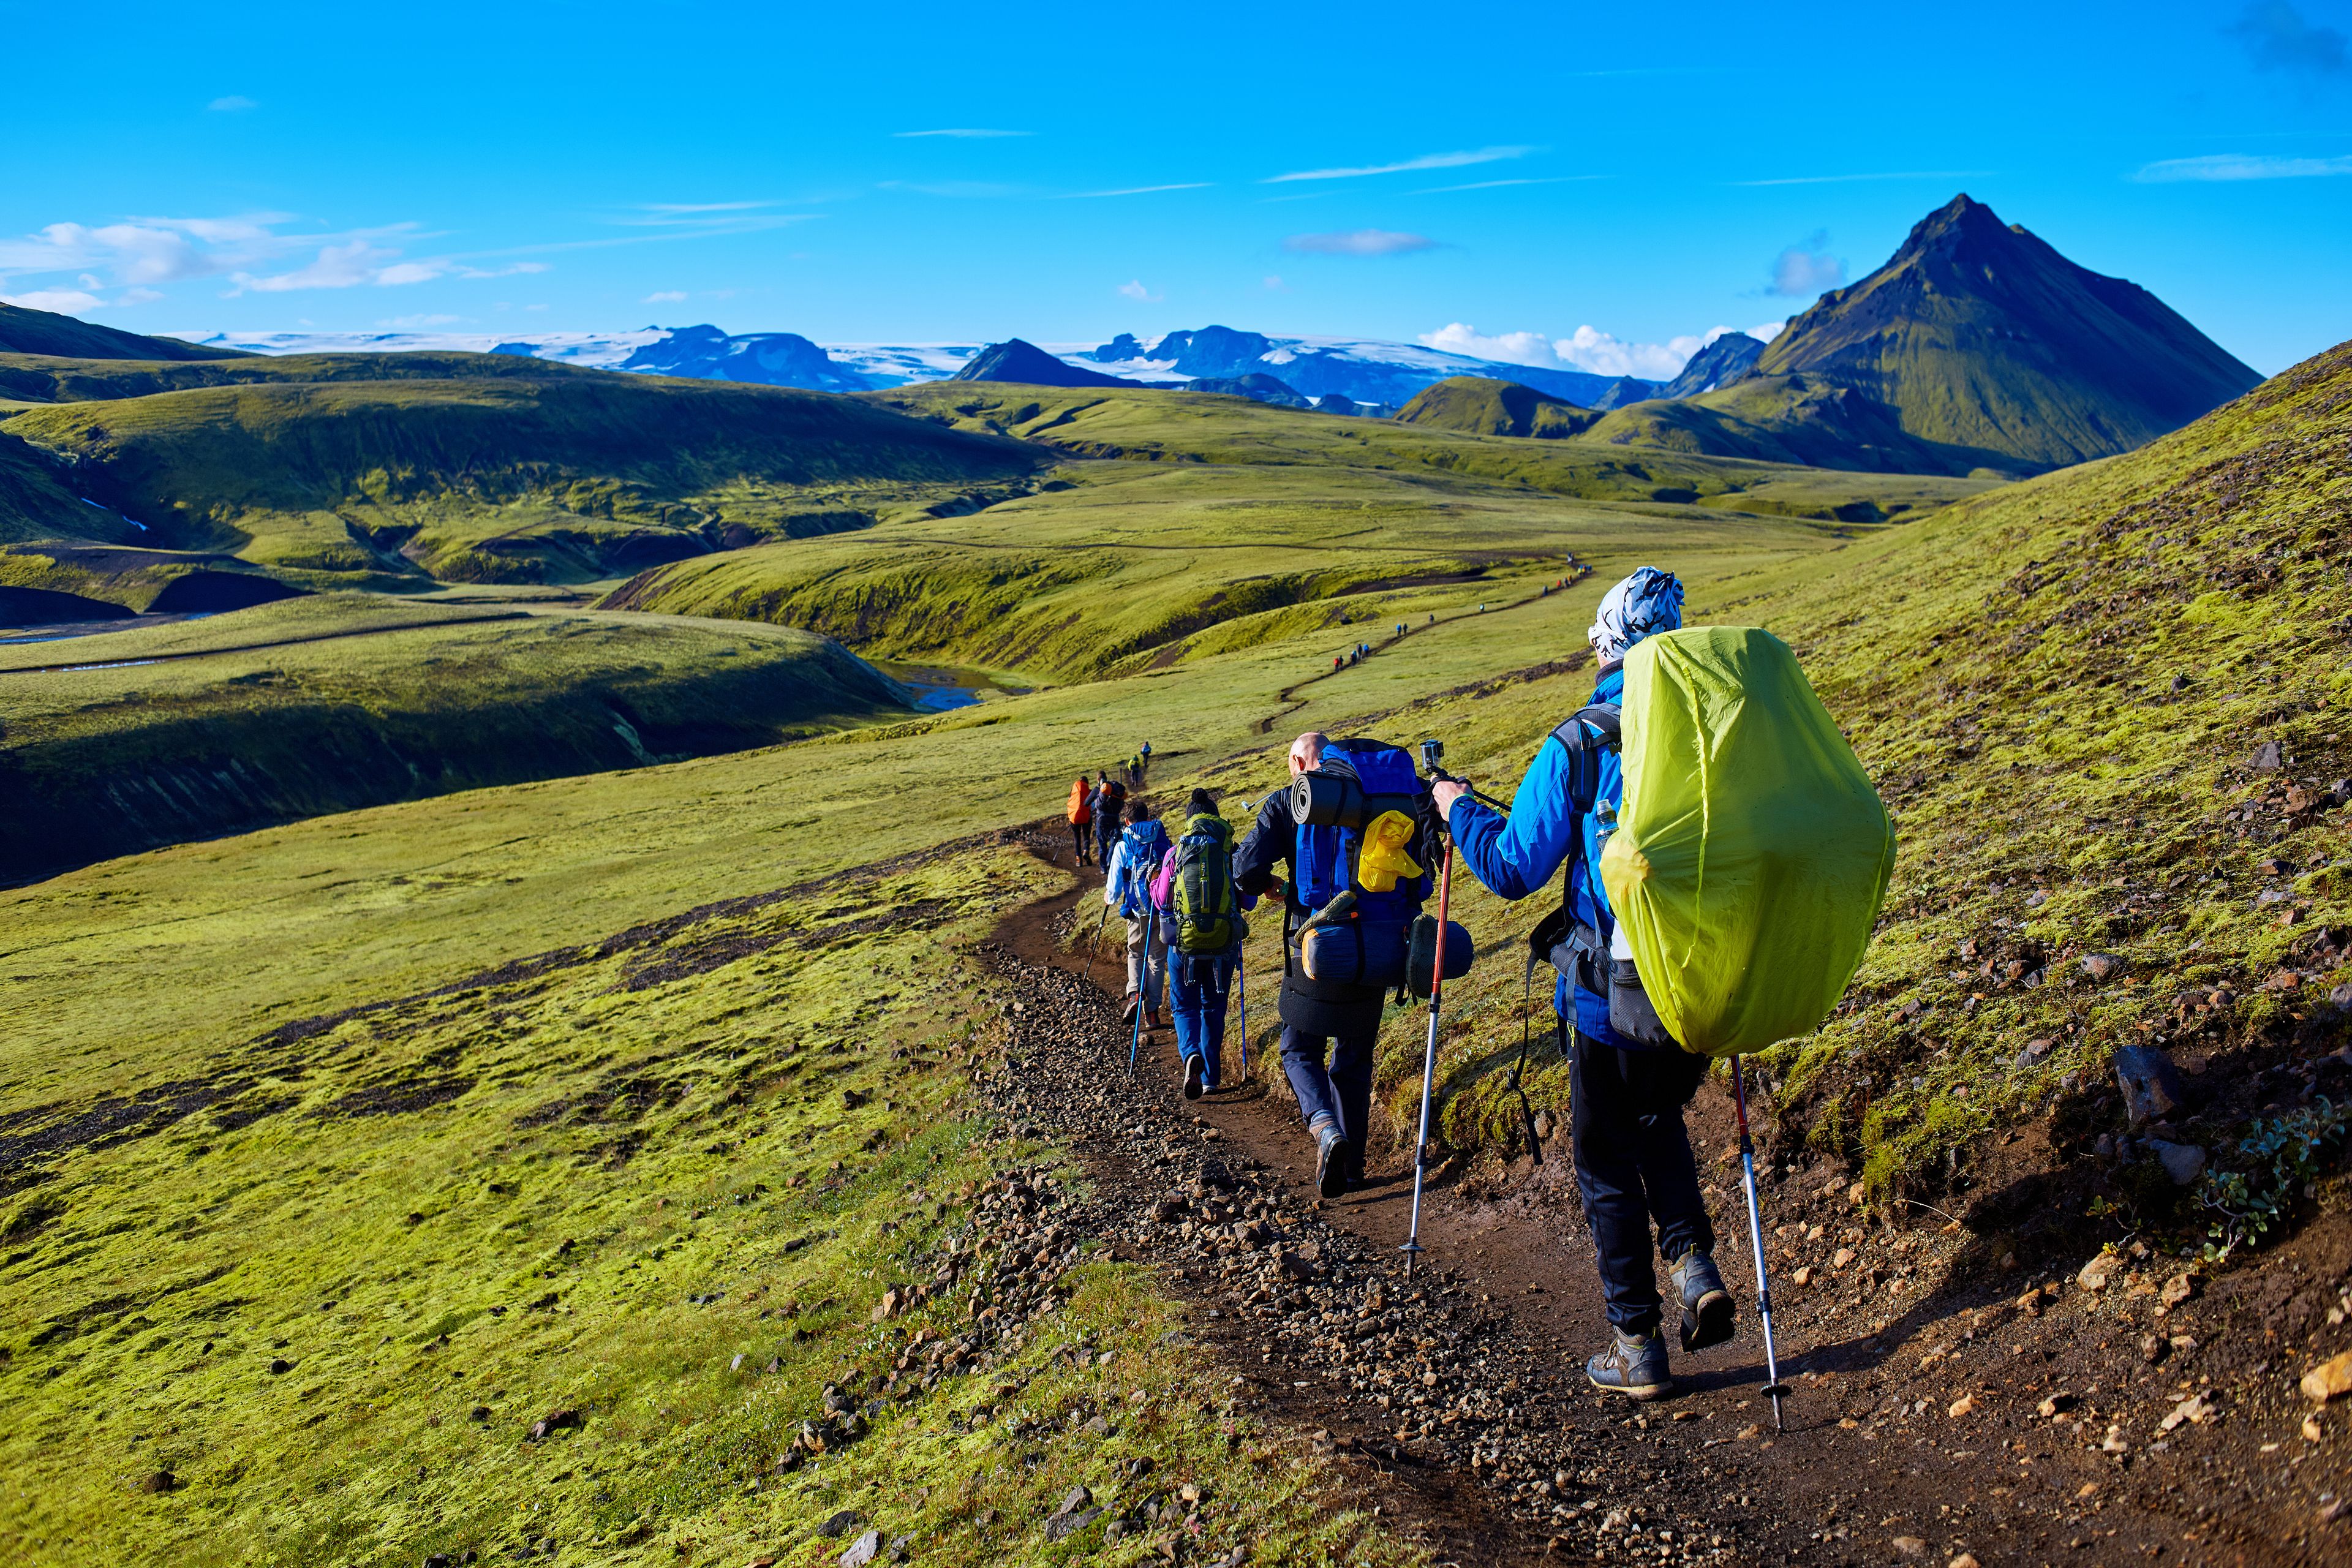 Hikers on the trail in the Islandic mountains